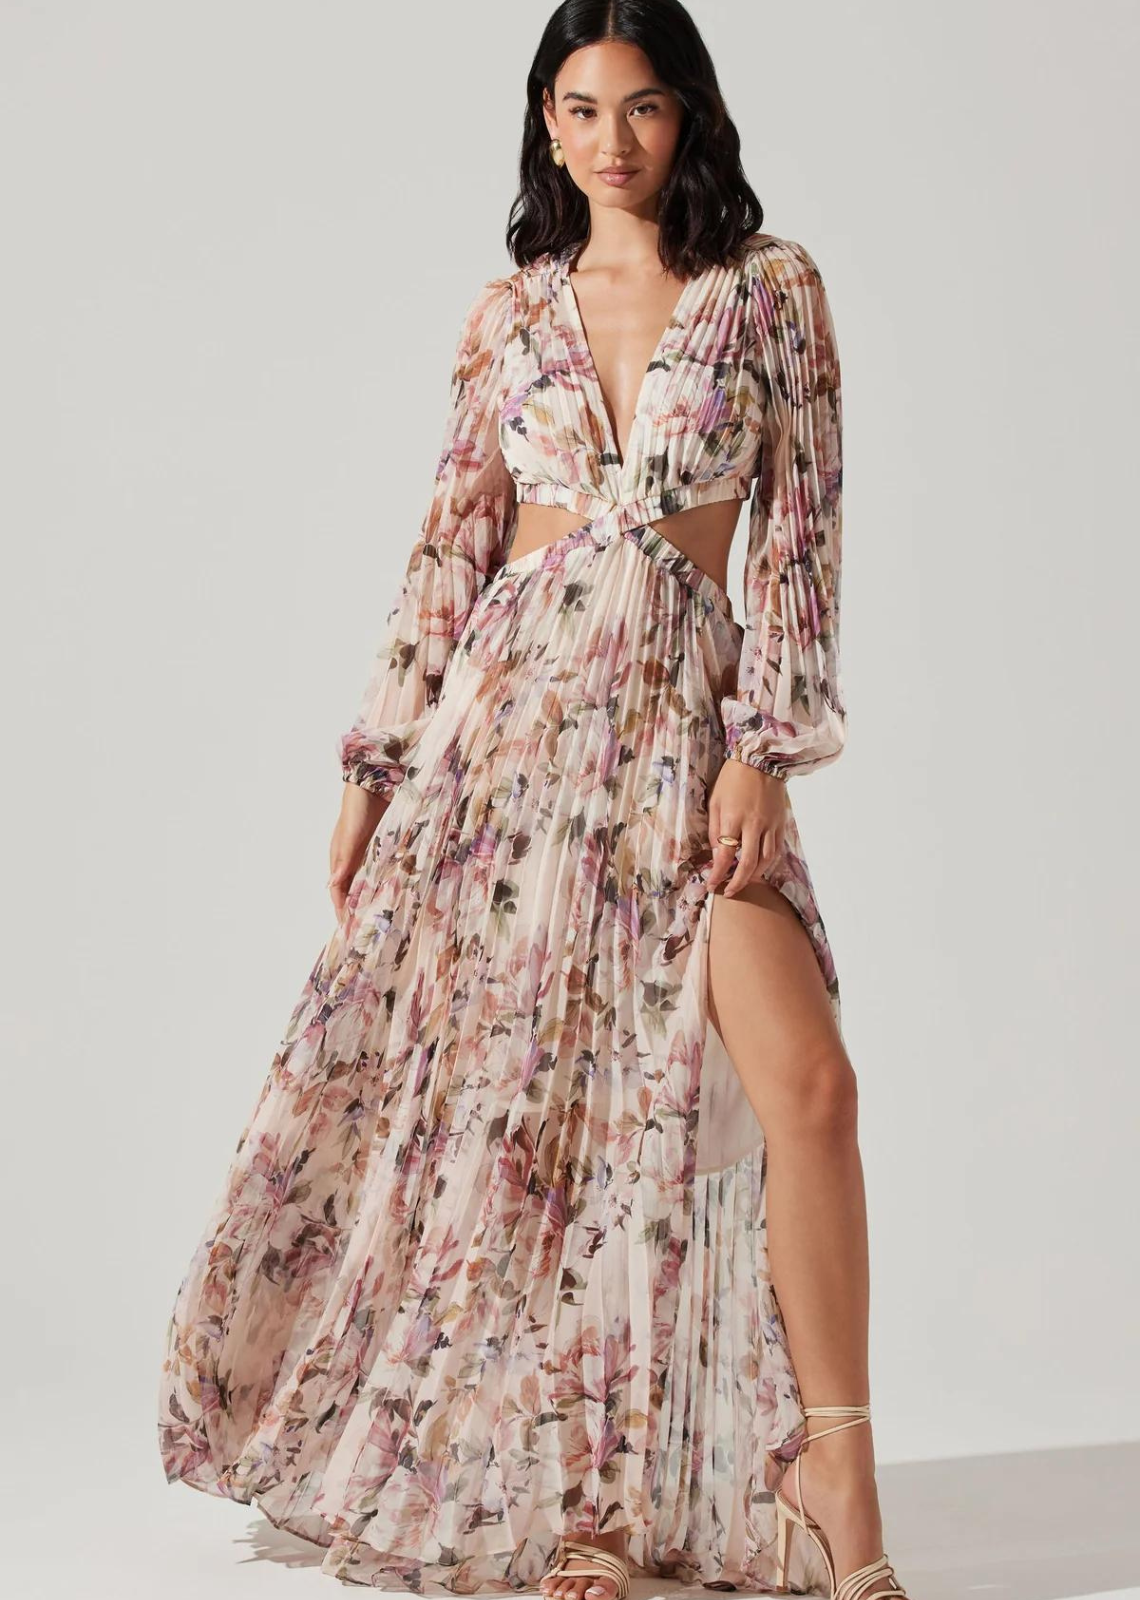 ASTR The Label Revery Dress. Pleated floral print, deep v-neckline, side slit Side cutout details, exposed mid-back Partially lined.